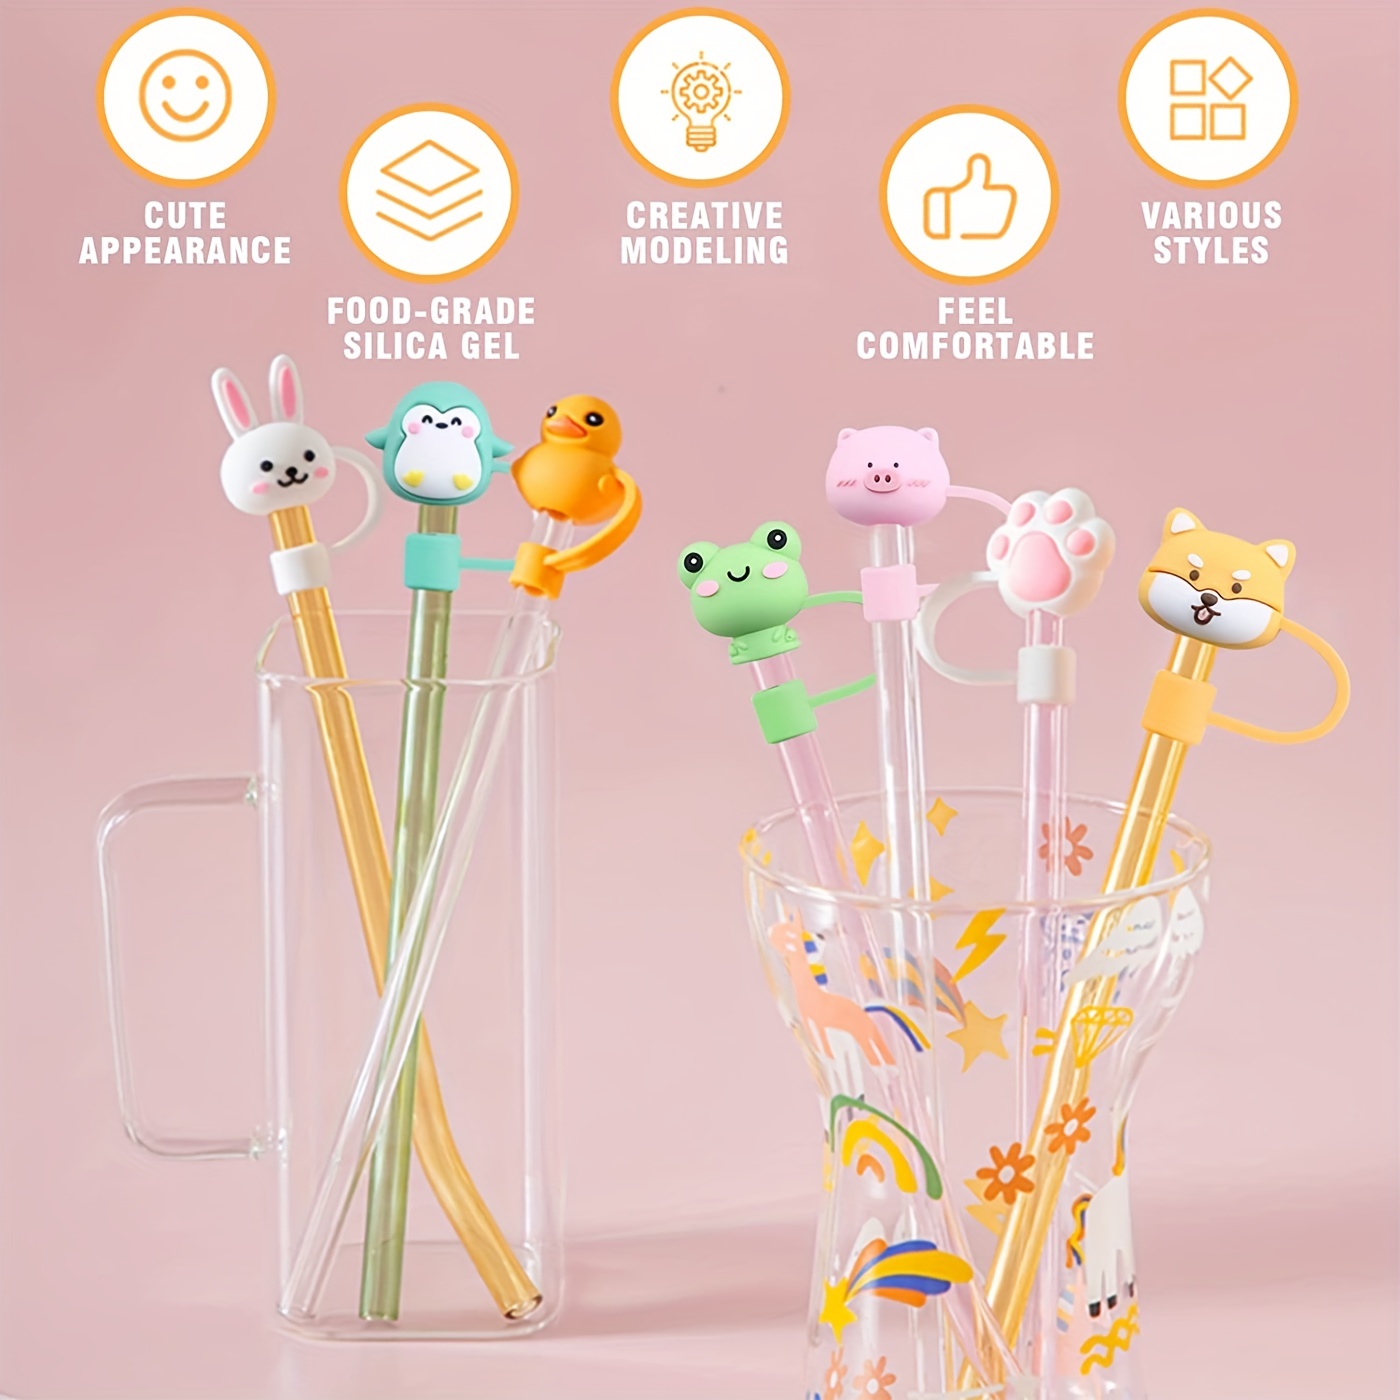 Cute Silicone Straw Plug, 1pc Straw Tip Cover Reusable Drinking Dust Cap  Cup Straw Accessories, Home Kitchen Party Gifts